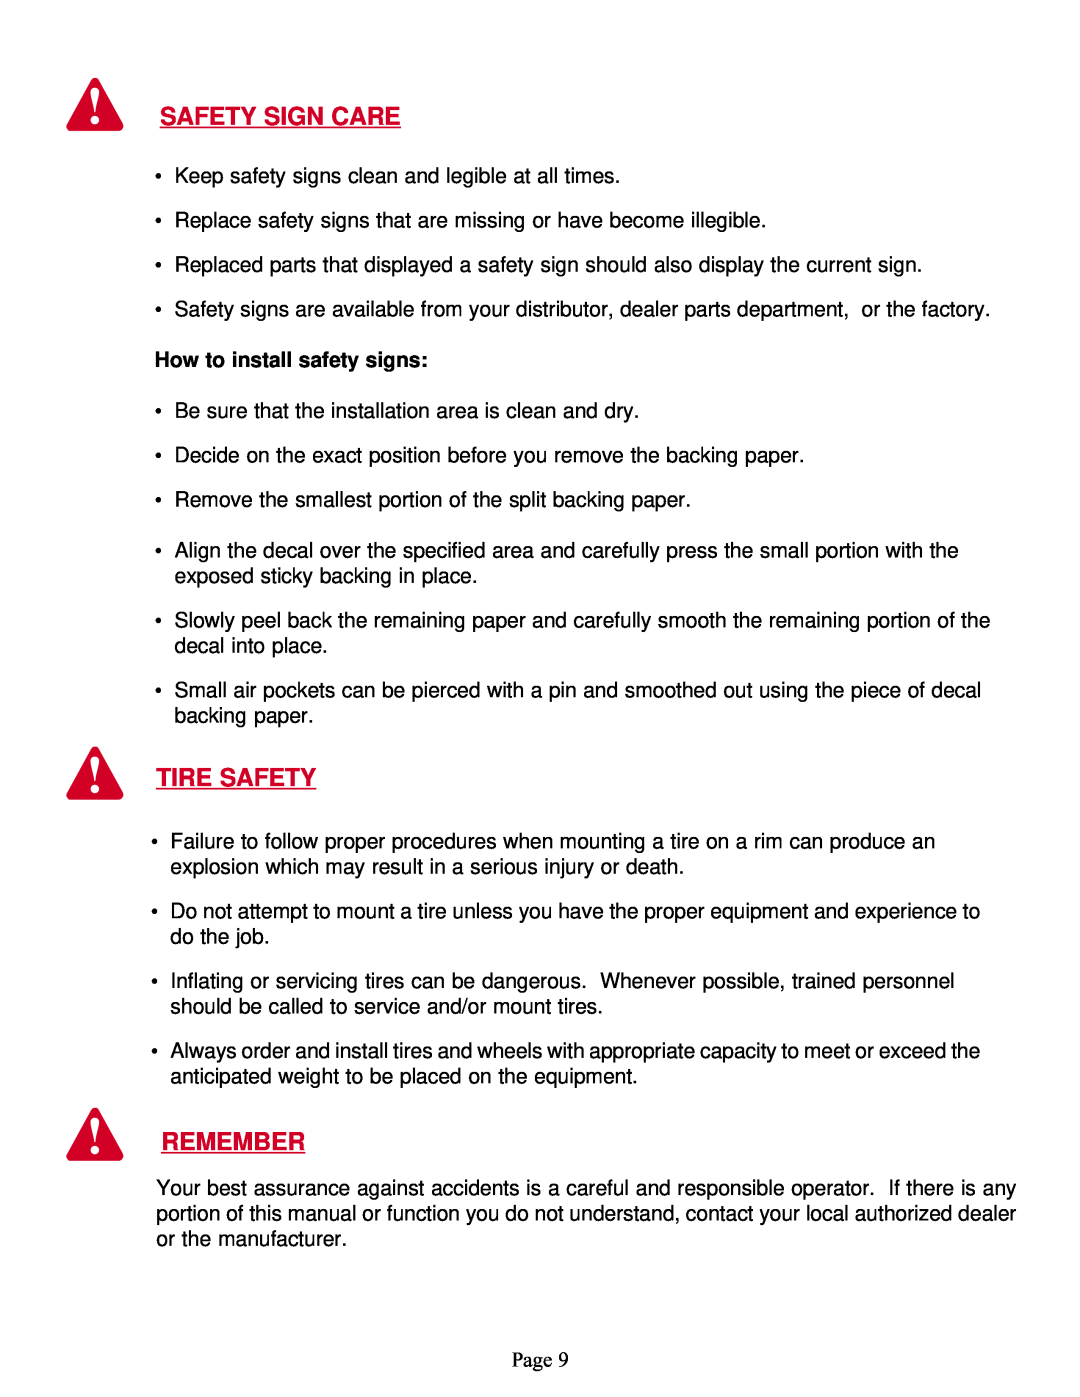 Demco Sprayer manual Safety Sign Care, Tire Safety, Remember, How to install safety signs 